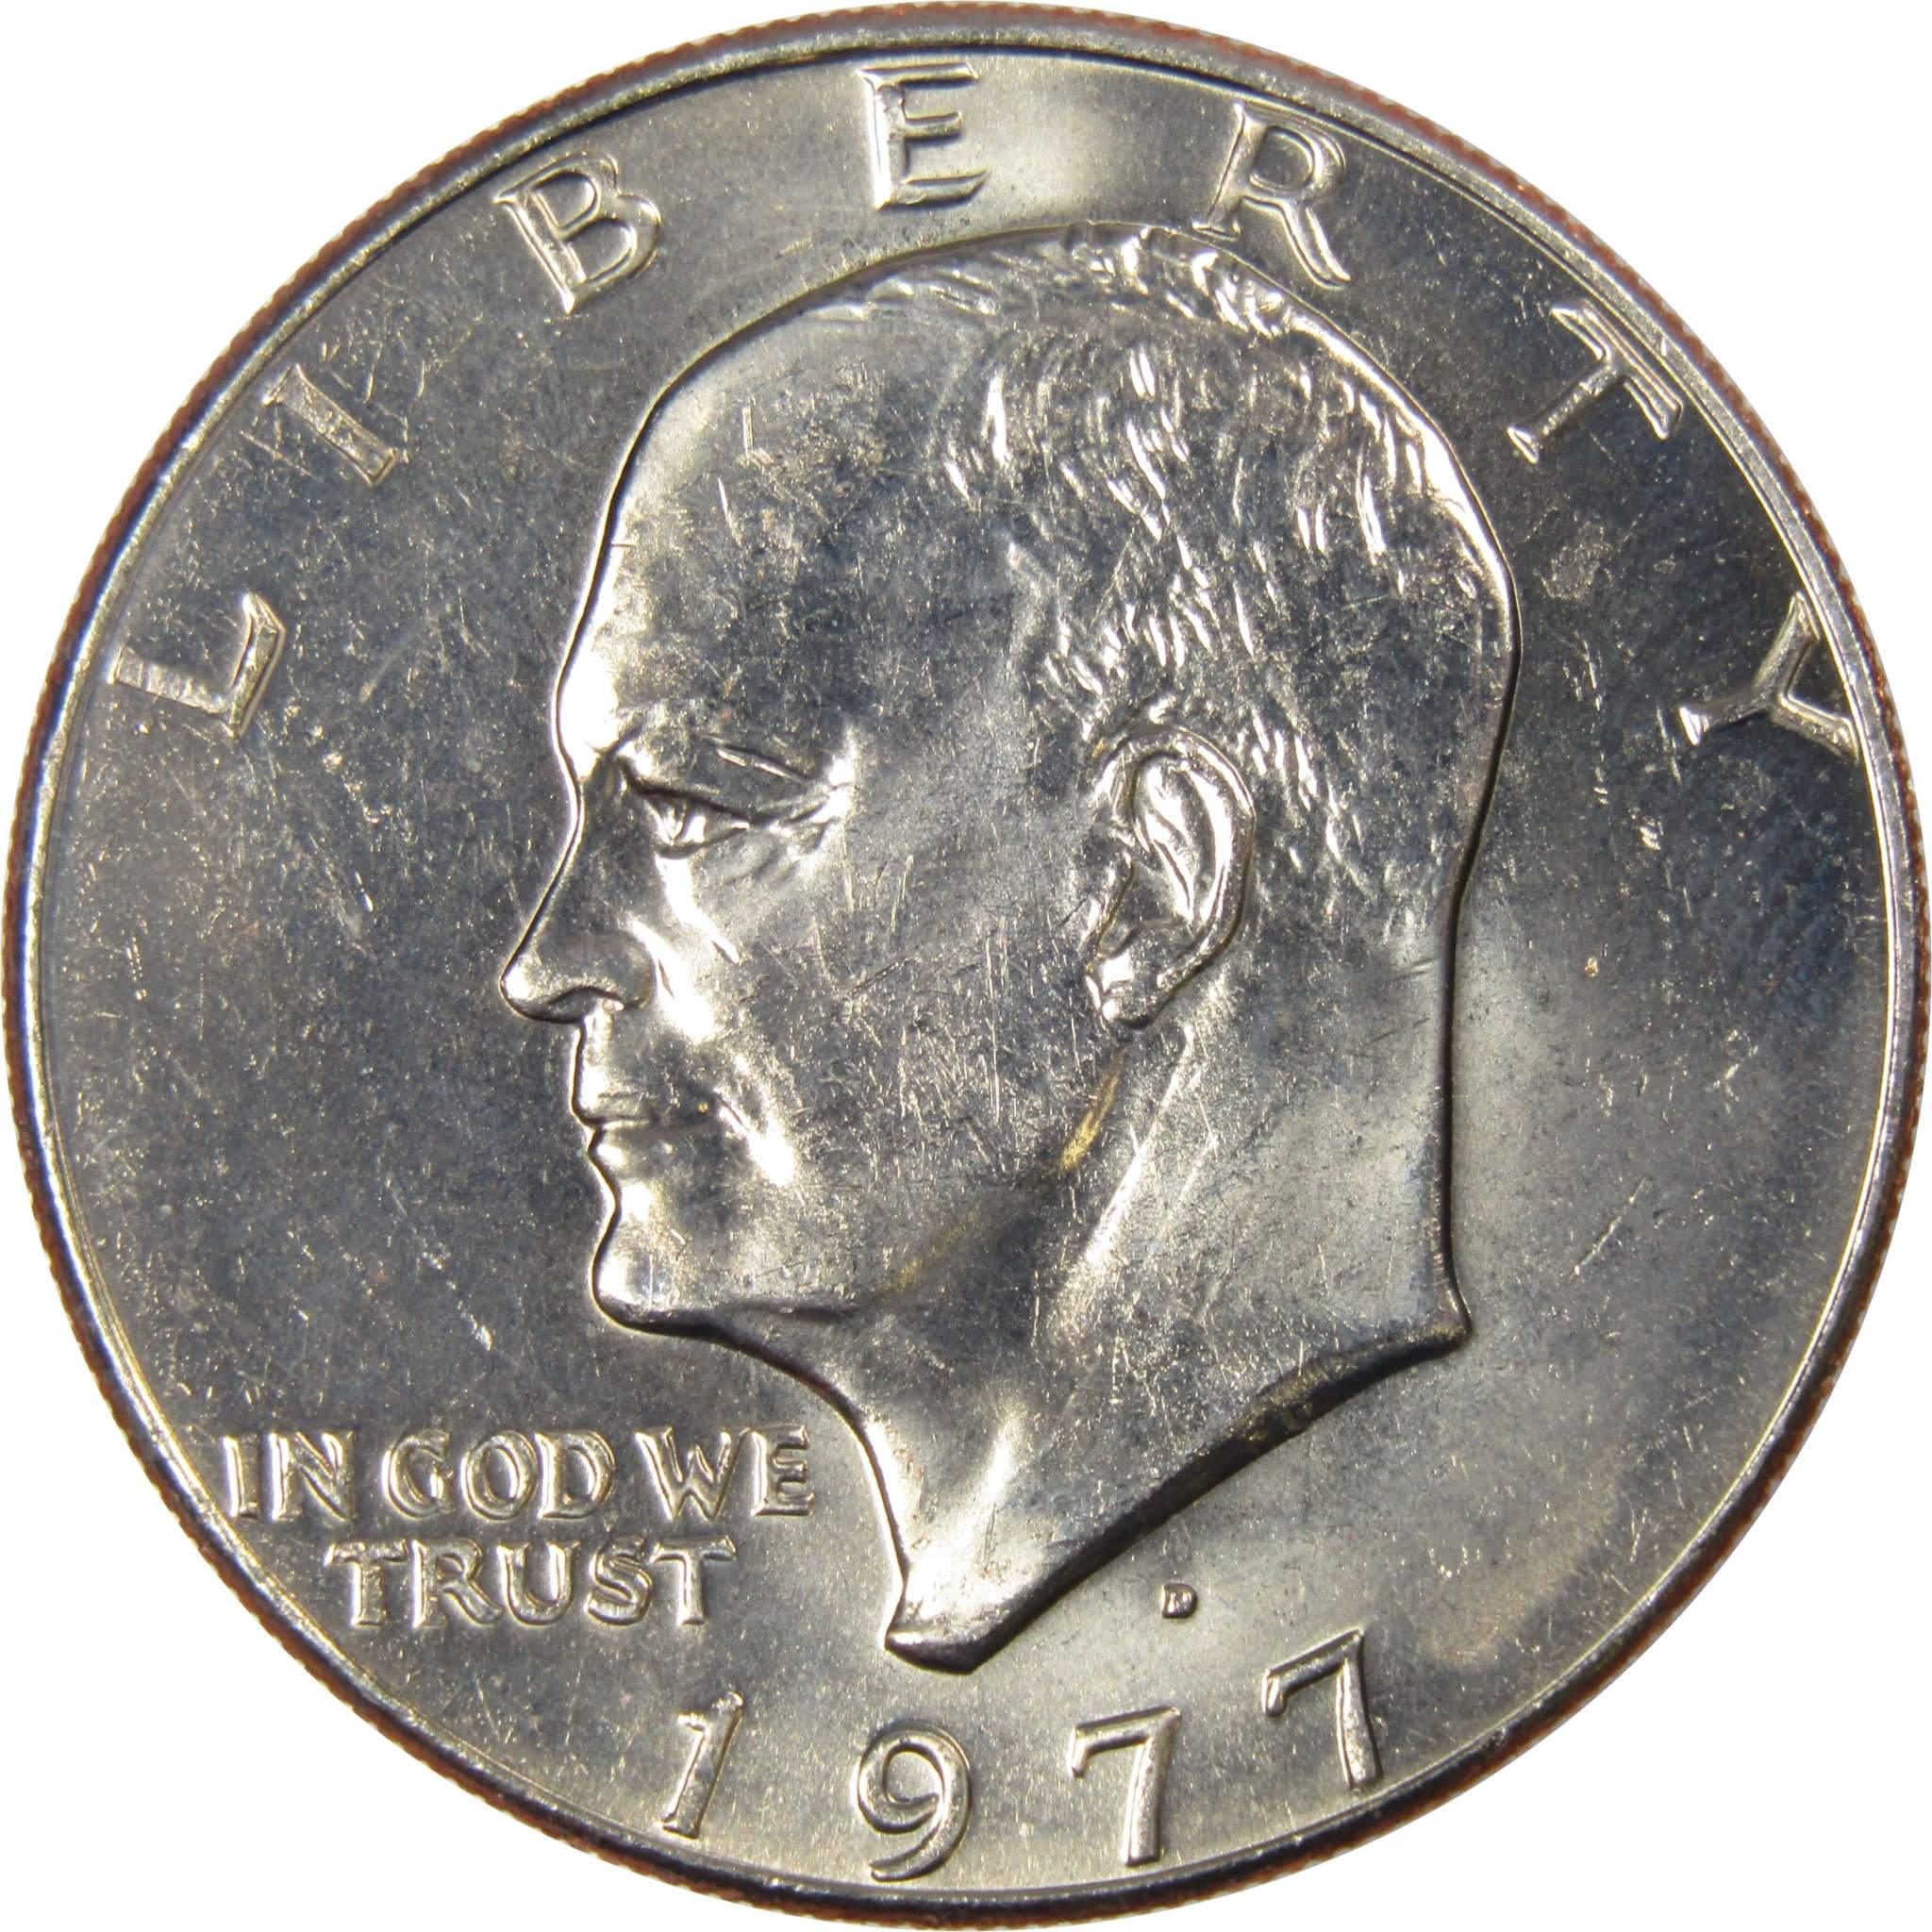 1977 D Eisenhower Dollar BU Uncirculated Mint State Clad IKE $1 US Coin